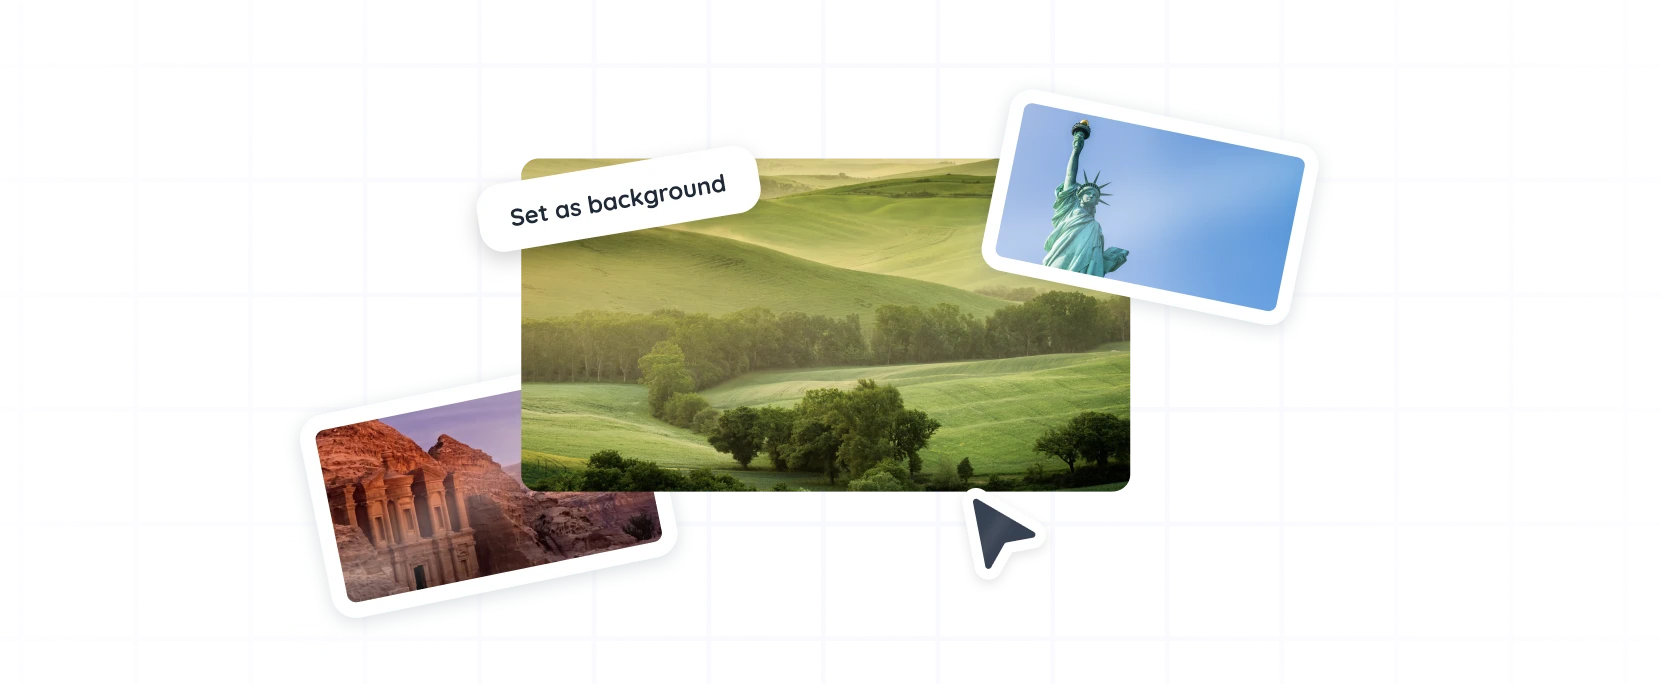 Classroomscreen backgrounds